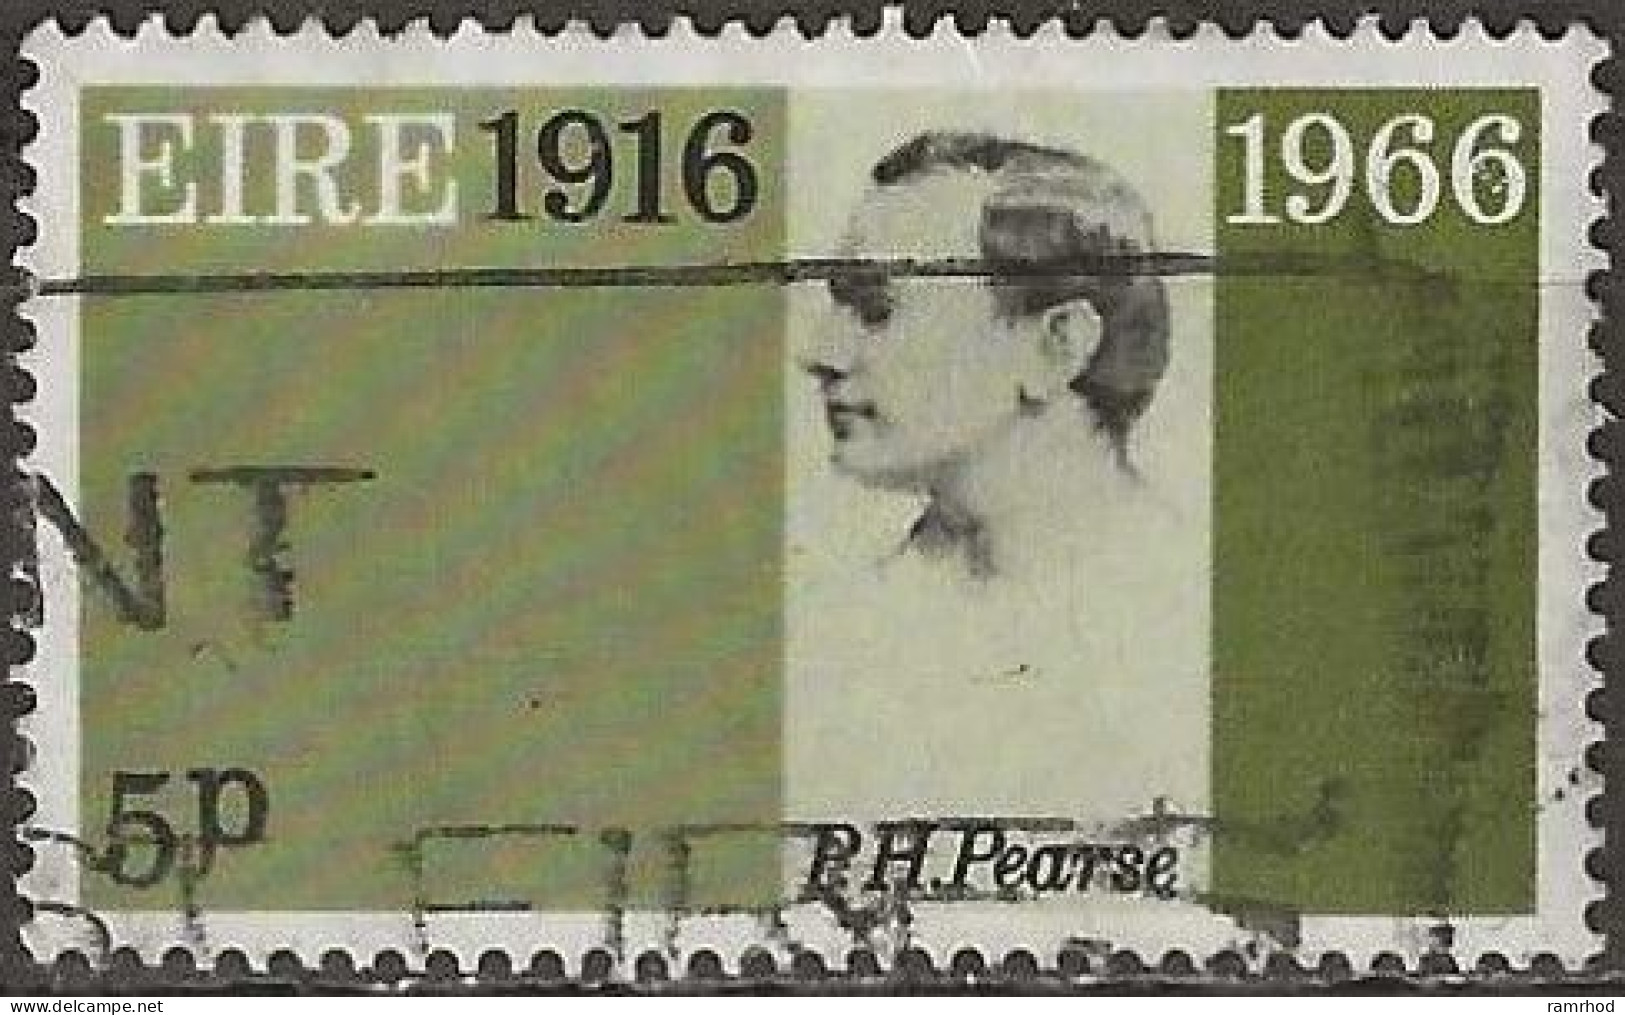 IRELAND 1966 50th Anniversary Of Easter Rising - 5d P. H. Pearse FU - Usati